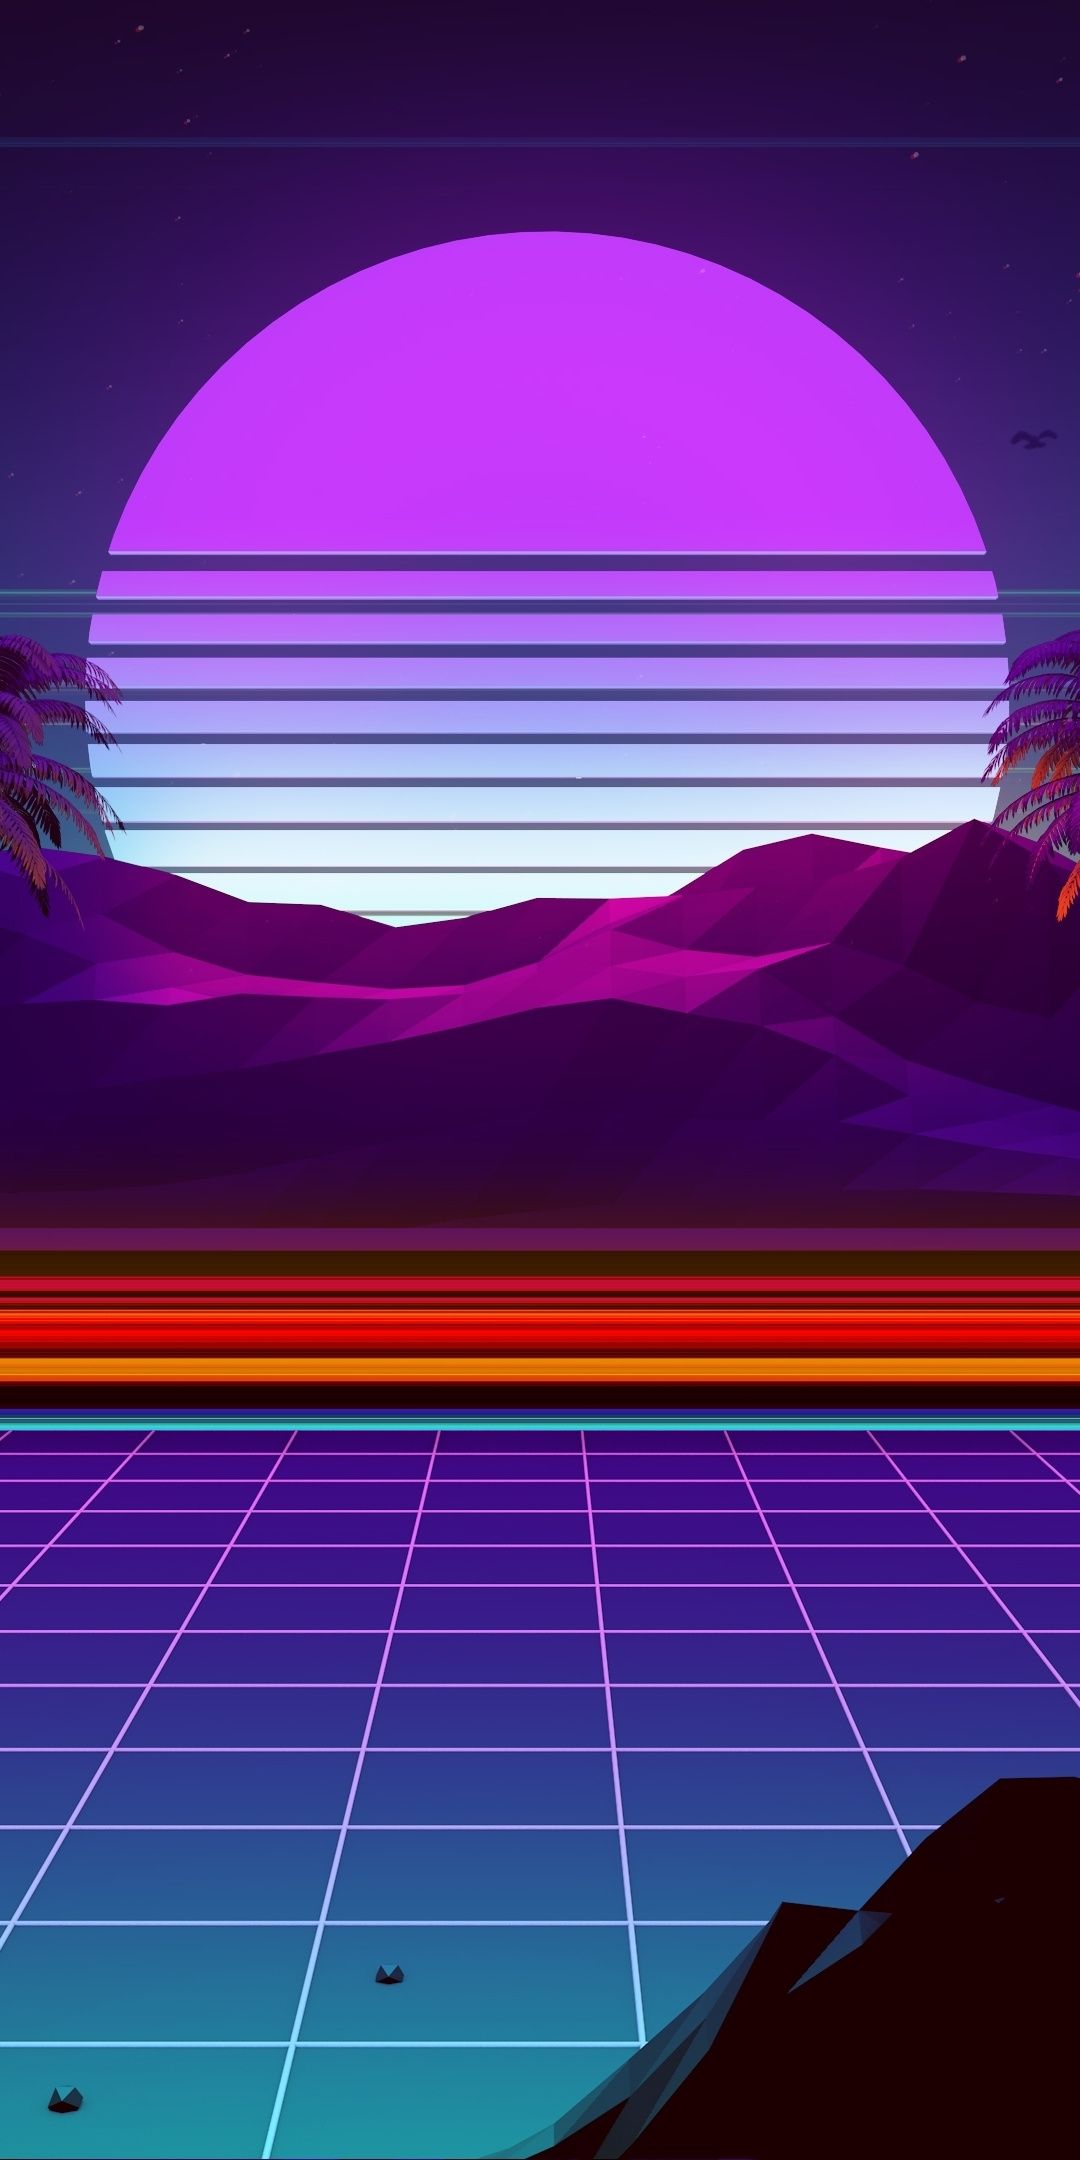 An image of a retro style landscape - Synthwave